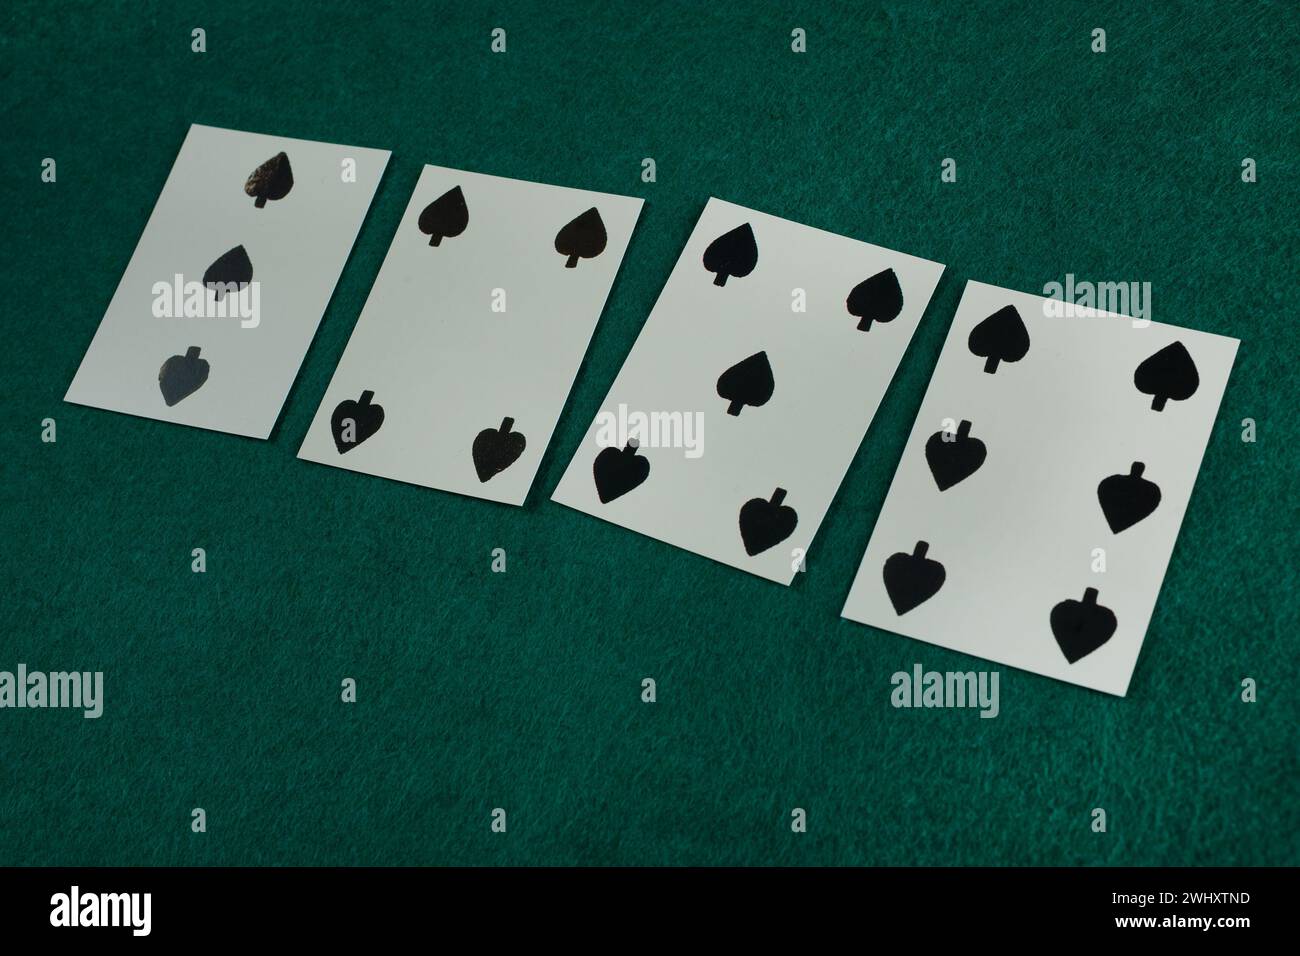 Old west era playing card on green gambling table. 3, 4, 5, 6 of spades. Stock Photo